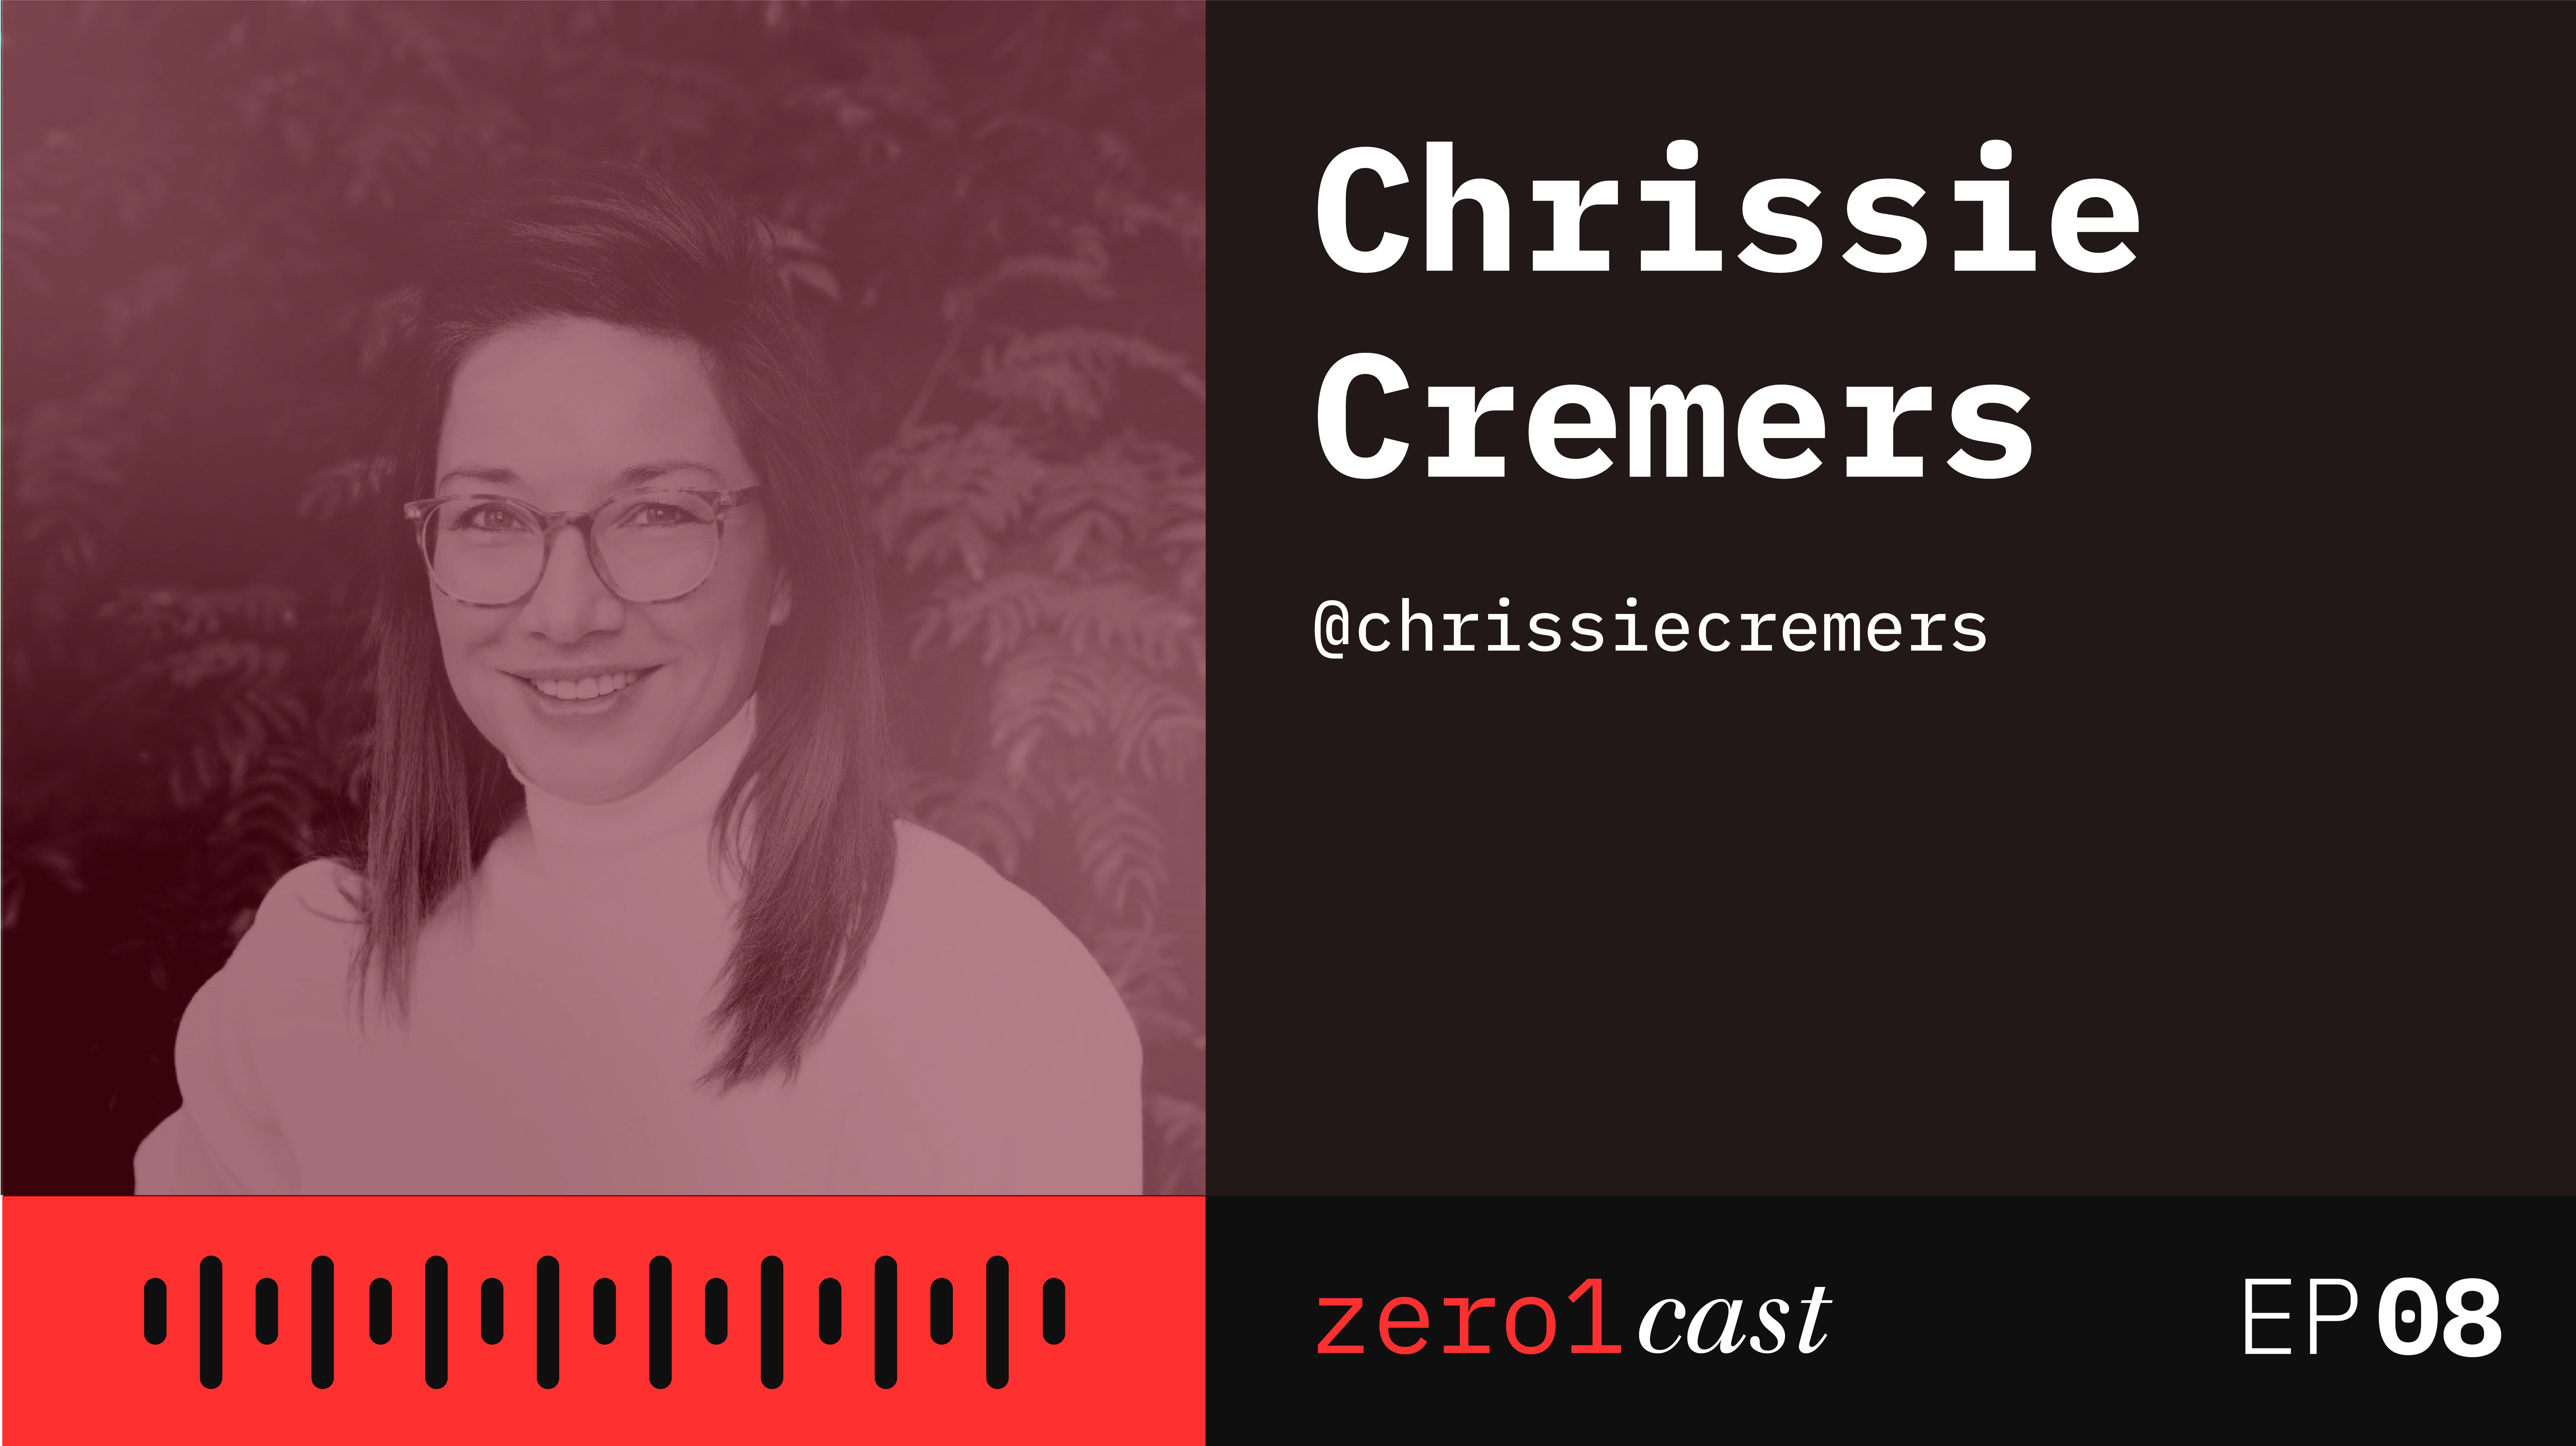 Chrissie Cremers – Ethical aspects of AI, Diversity, Advertising, Job Market and many more